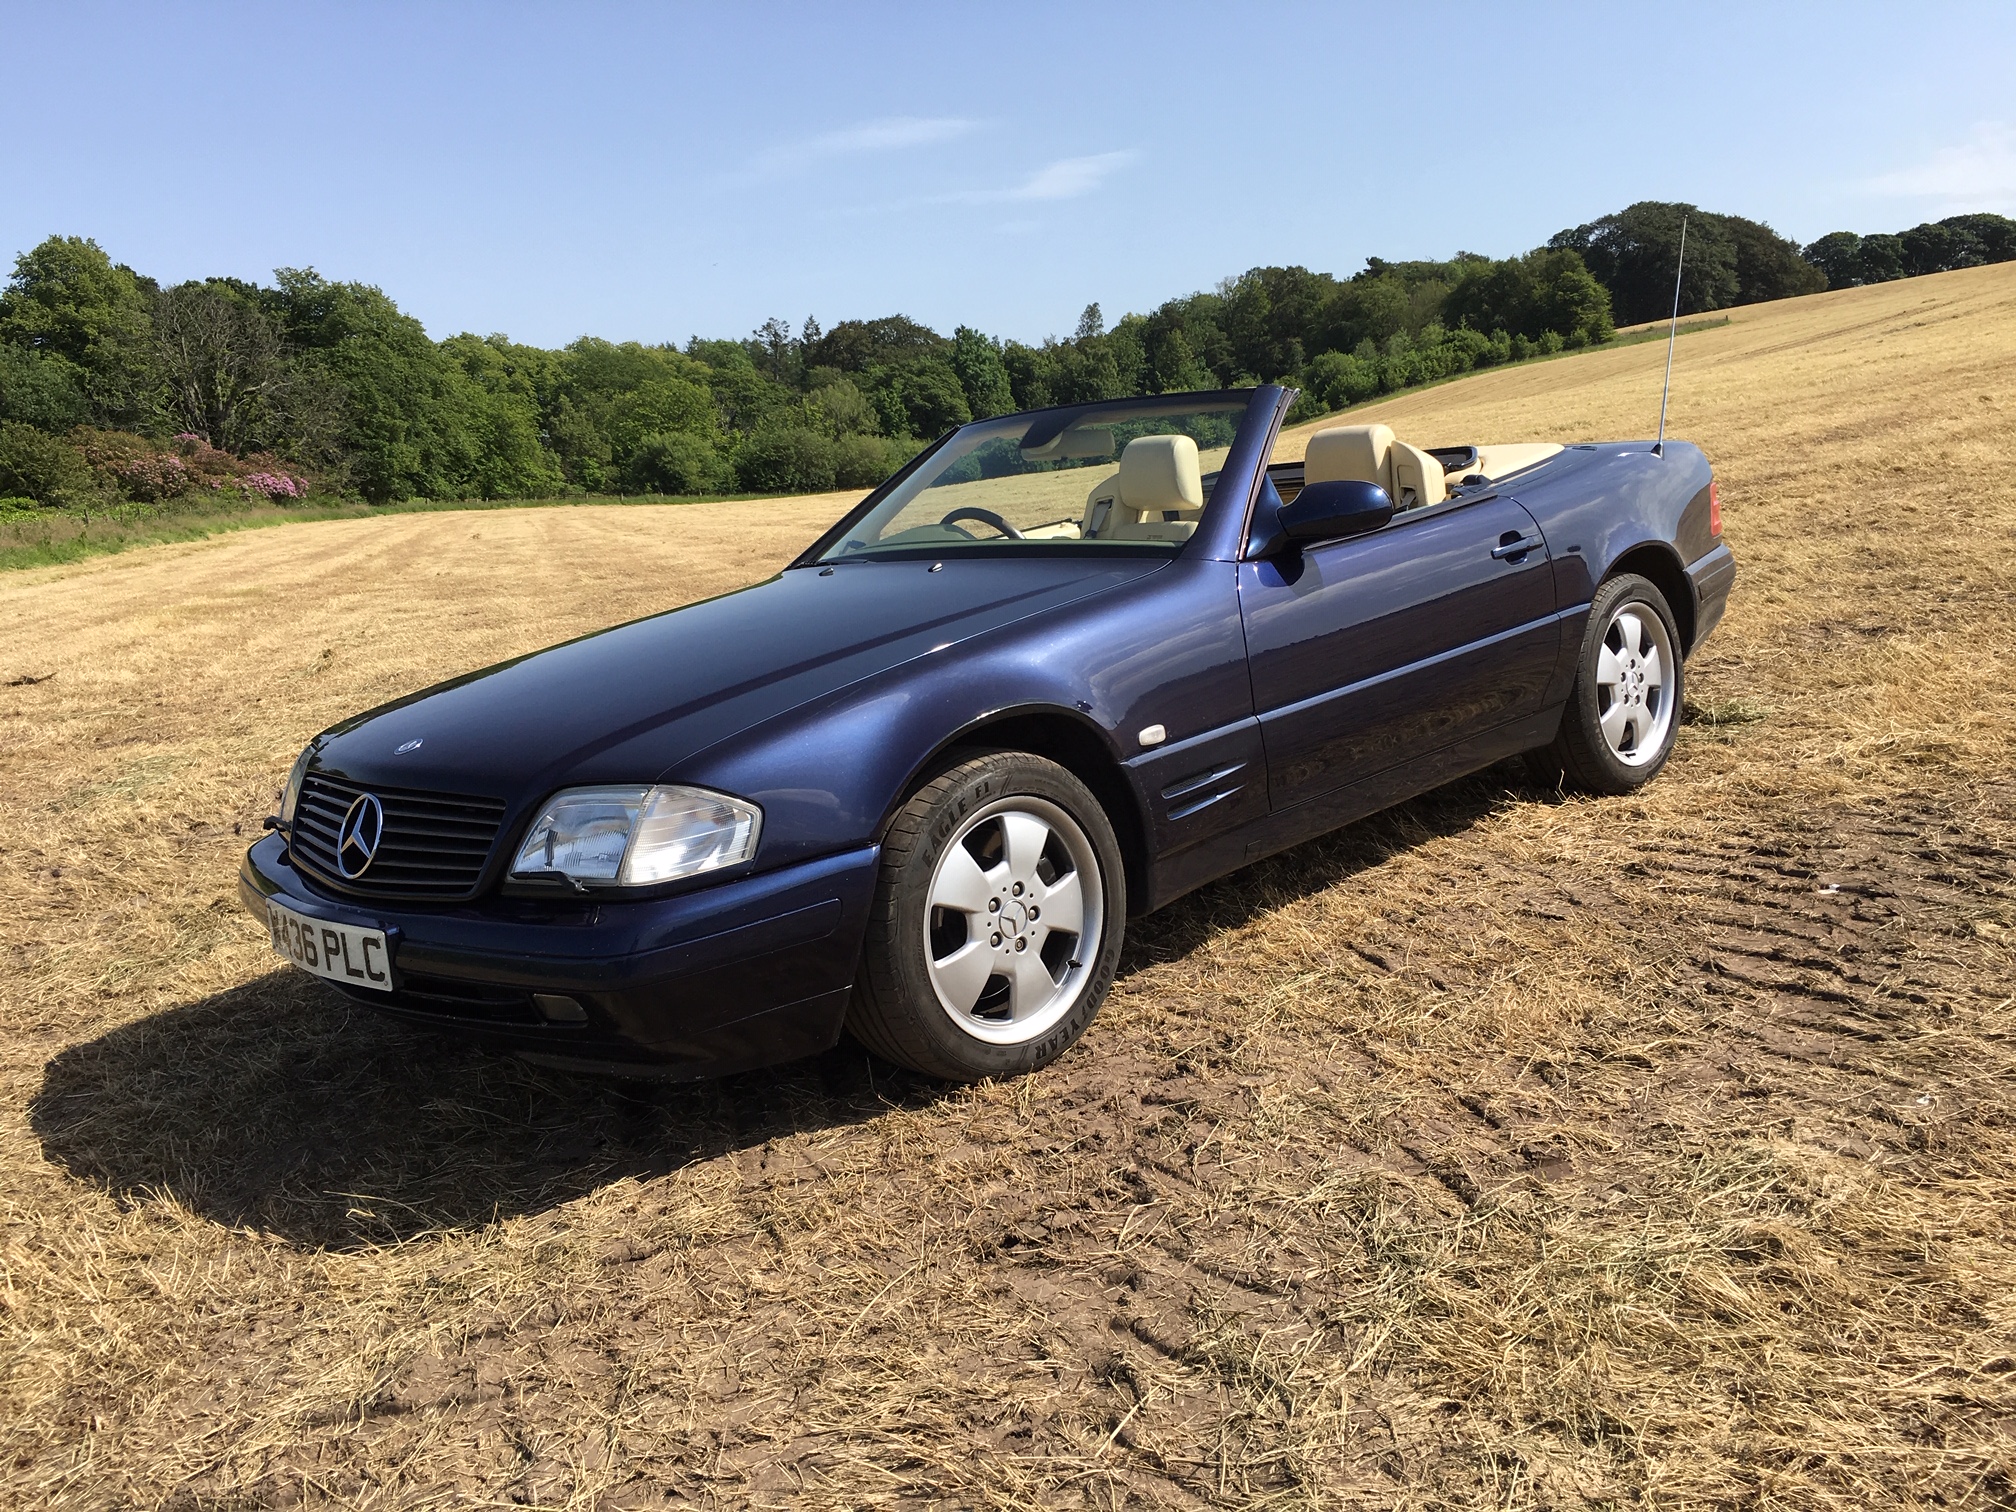 Mercedes SL320 R129 - Part 2 - Page 2 - Readers' Cars - PistonHeads